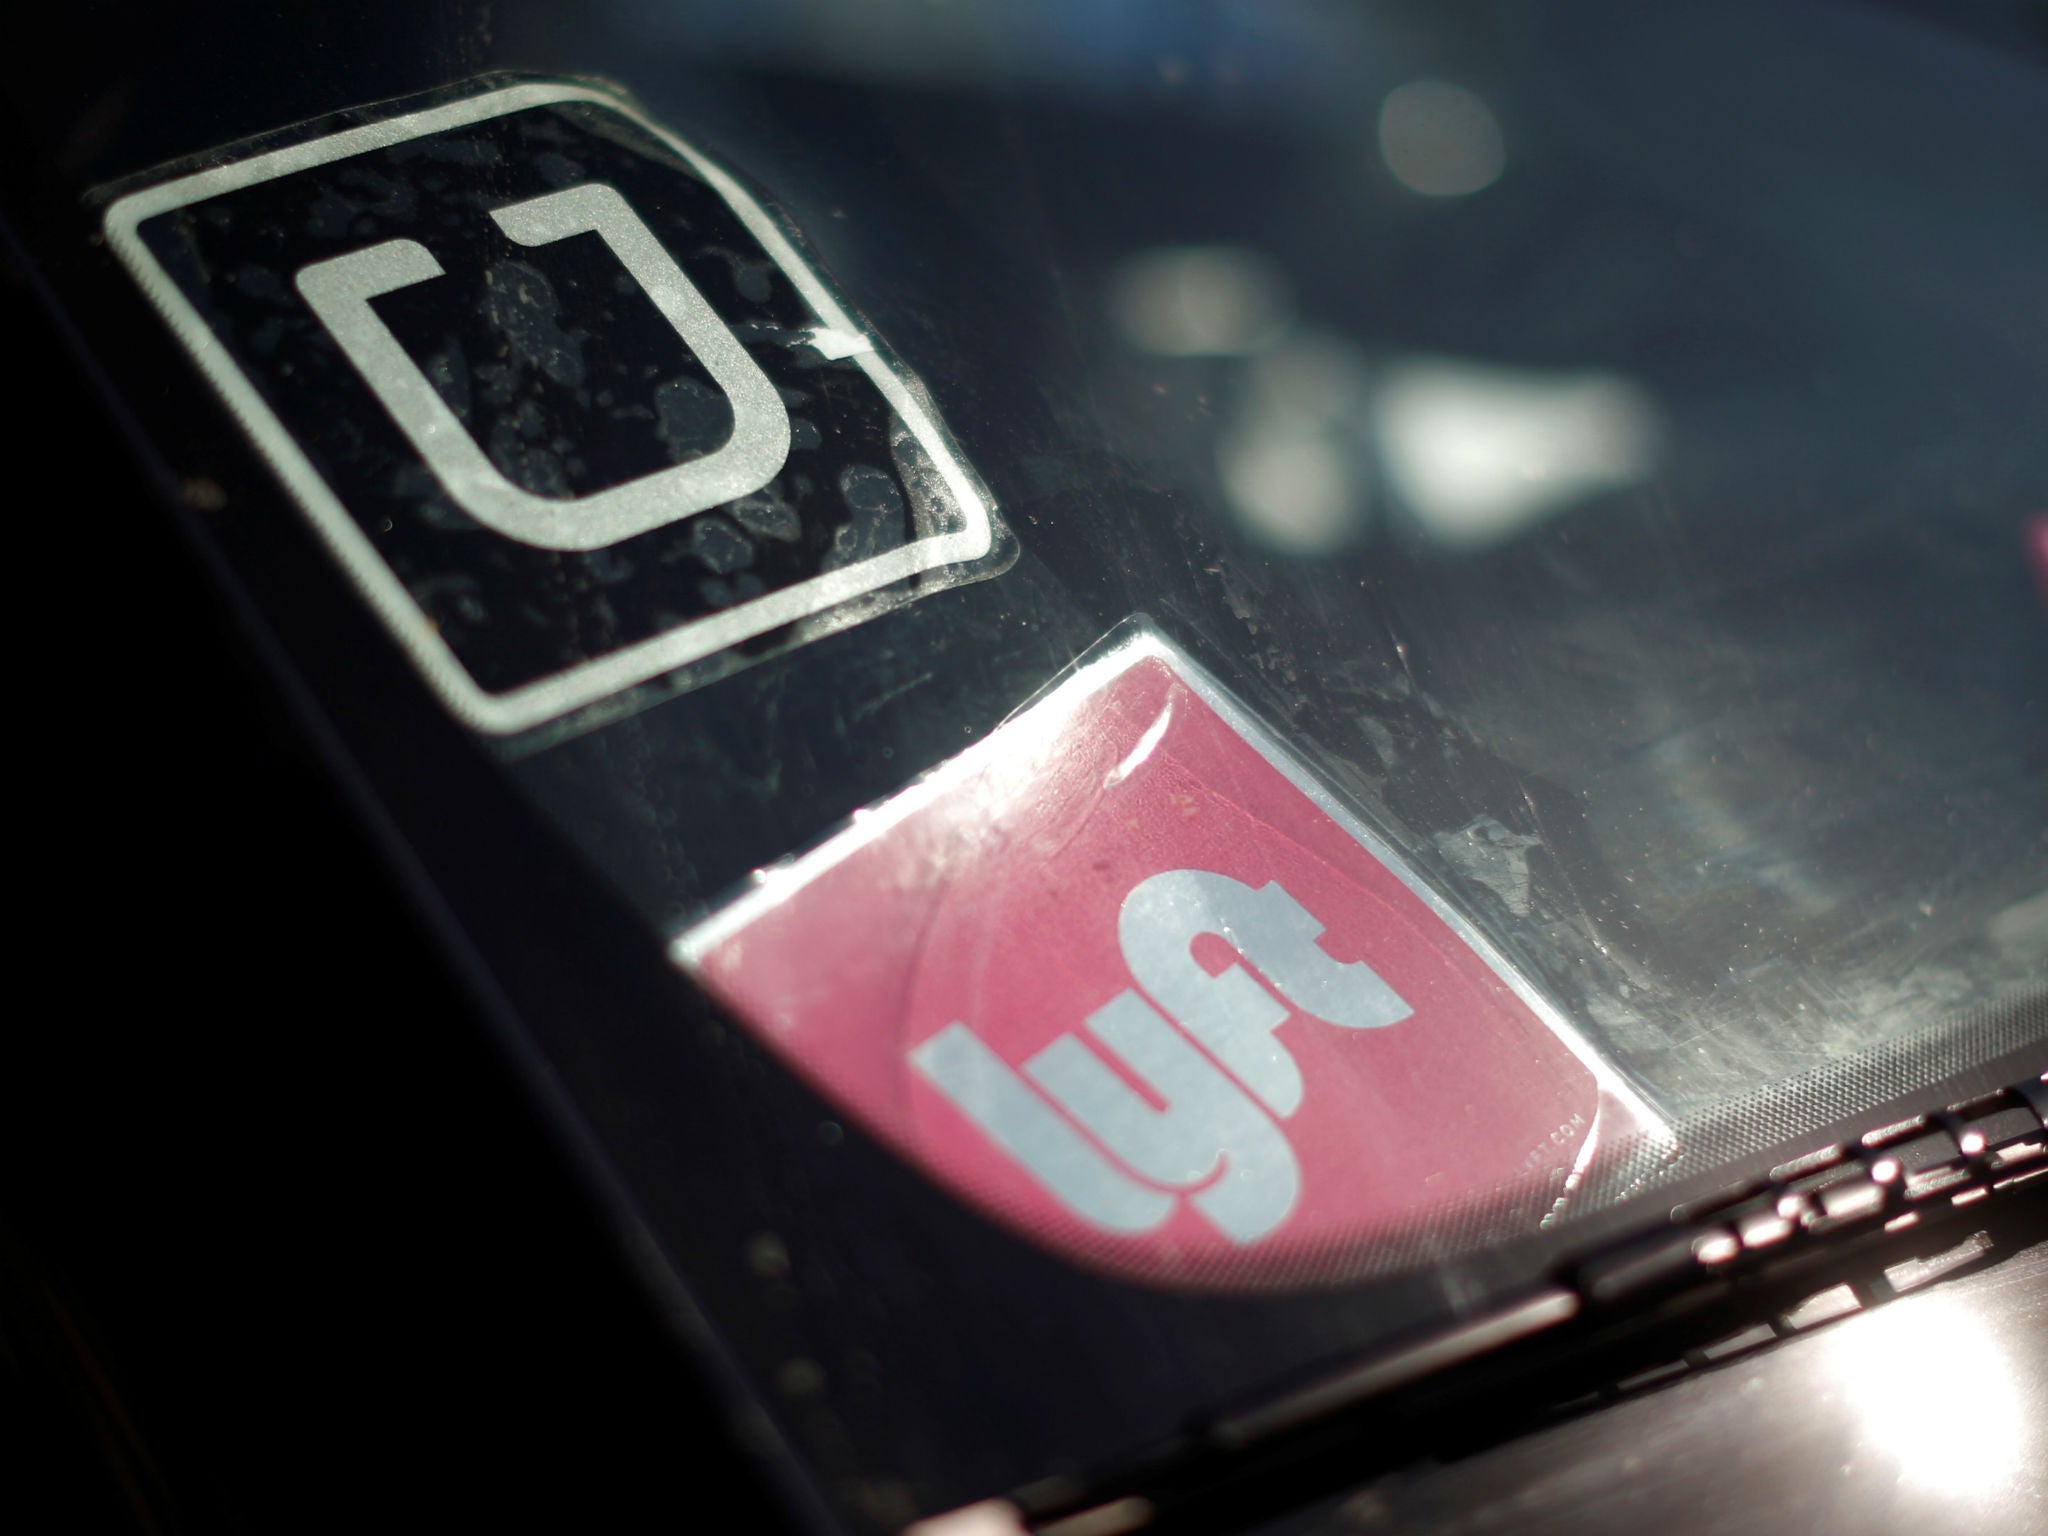 n IPO in spring 2019 would mean Lyft will go public before market leader Uber, which is planning to float late next year